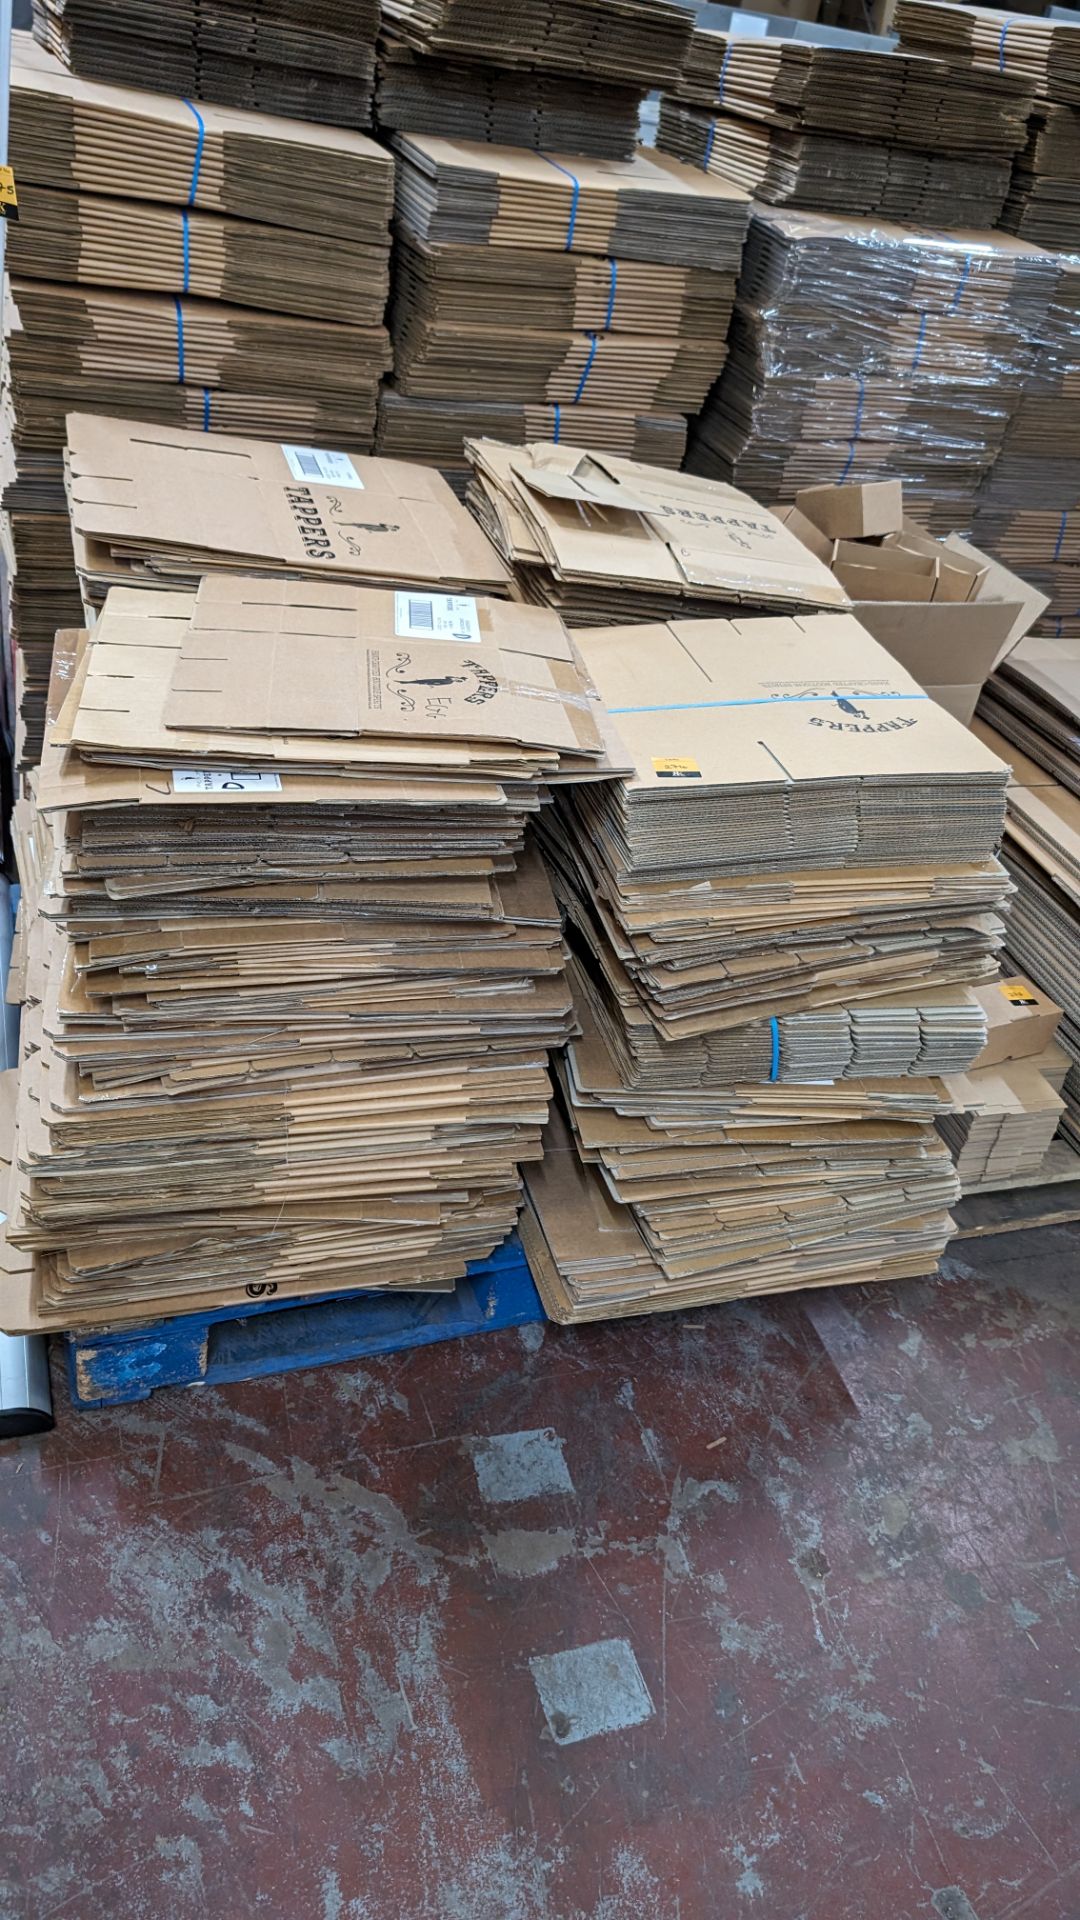 The contents of a pallet of flatpack cardboard boxes in 4 stacks. Each box when assembled incorpora